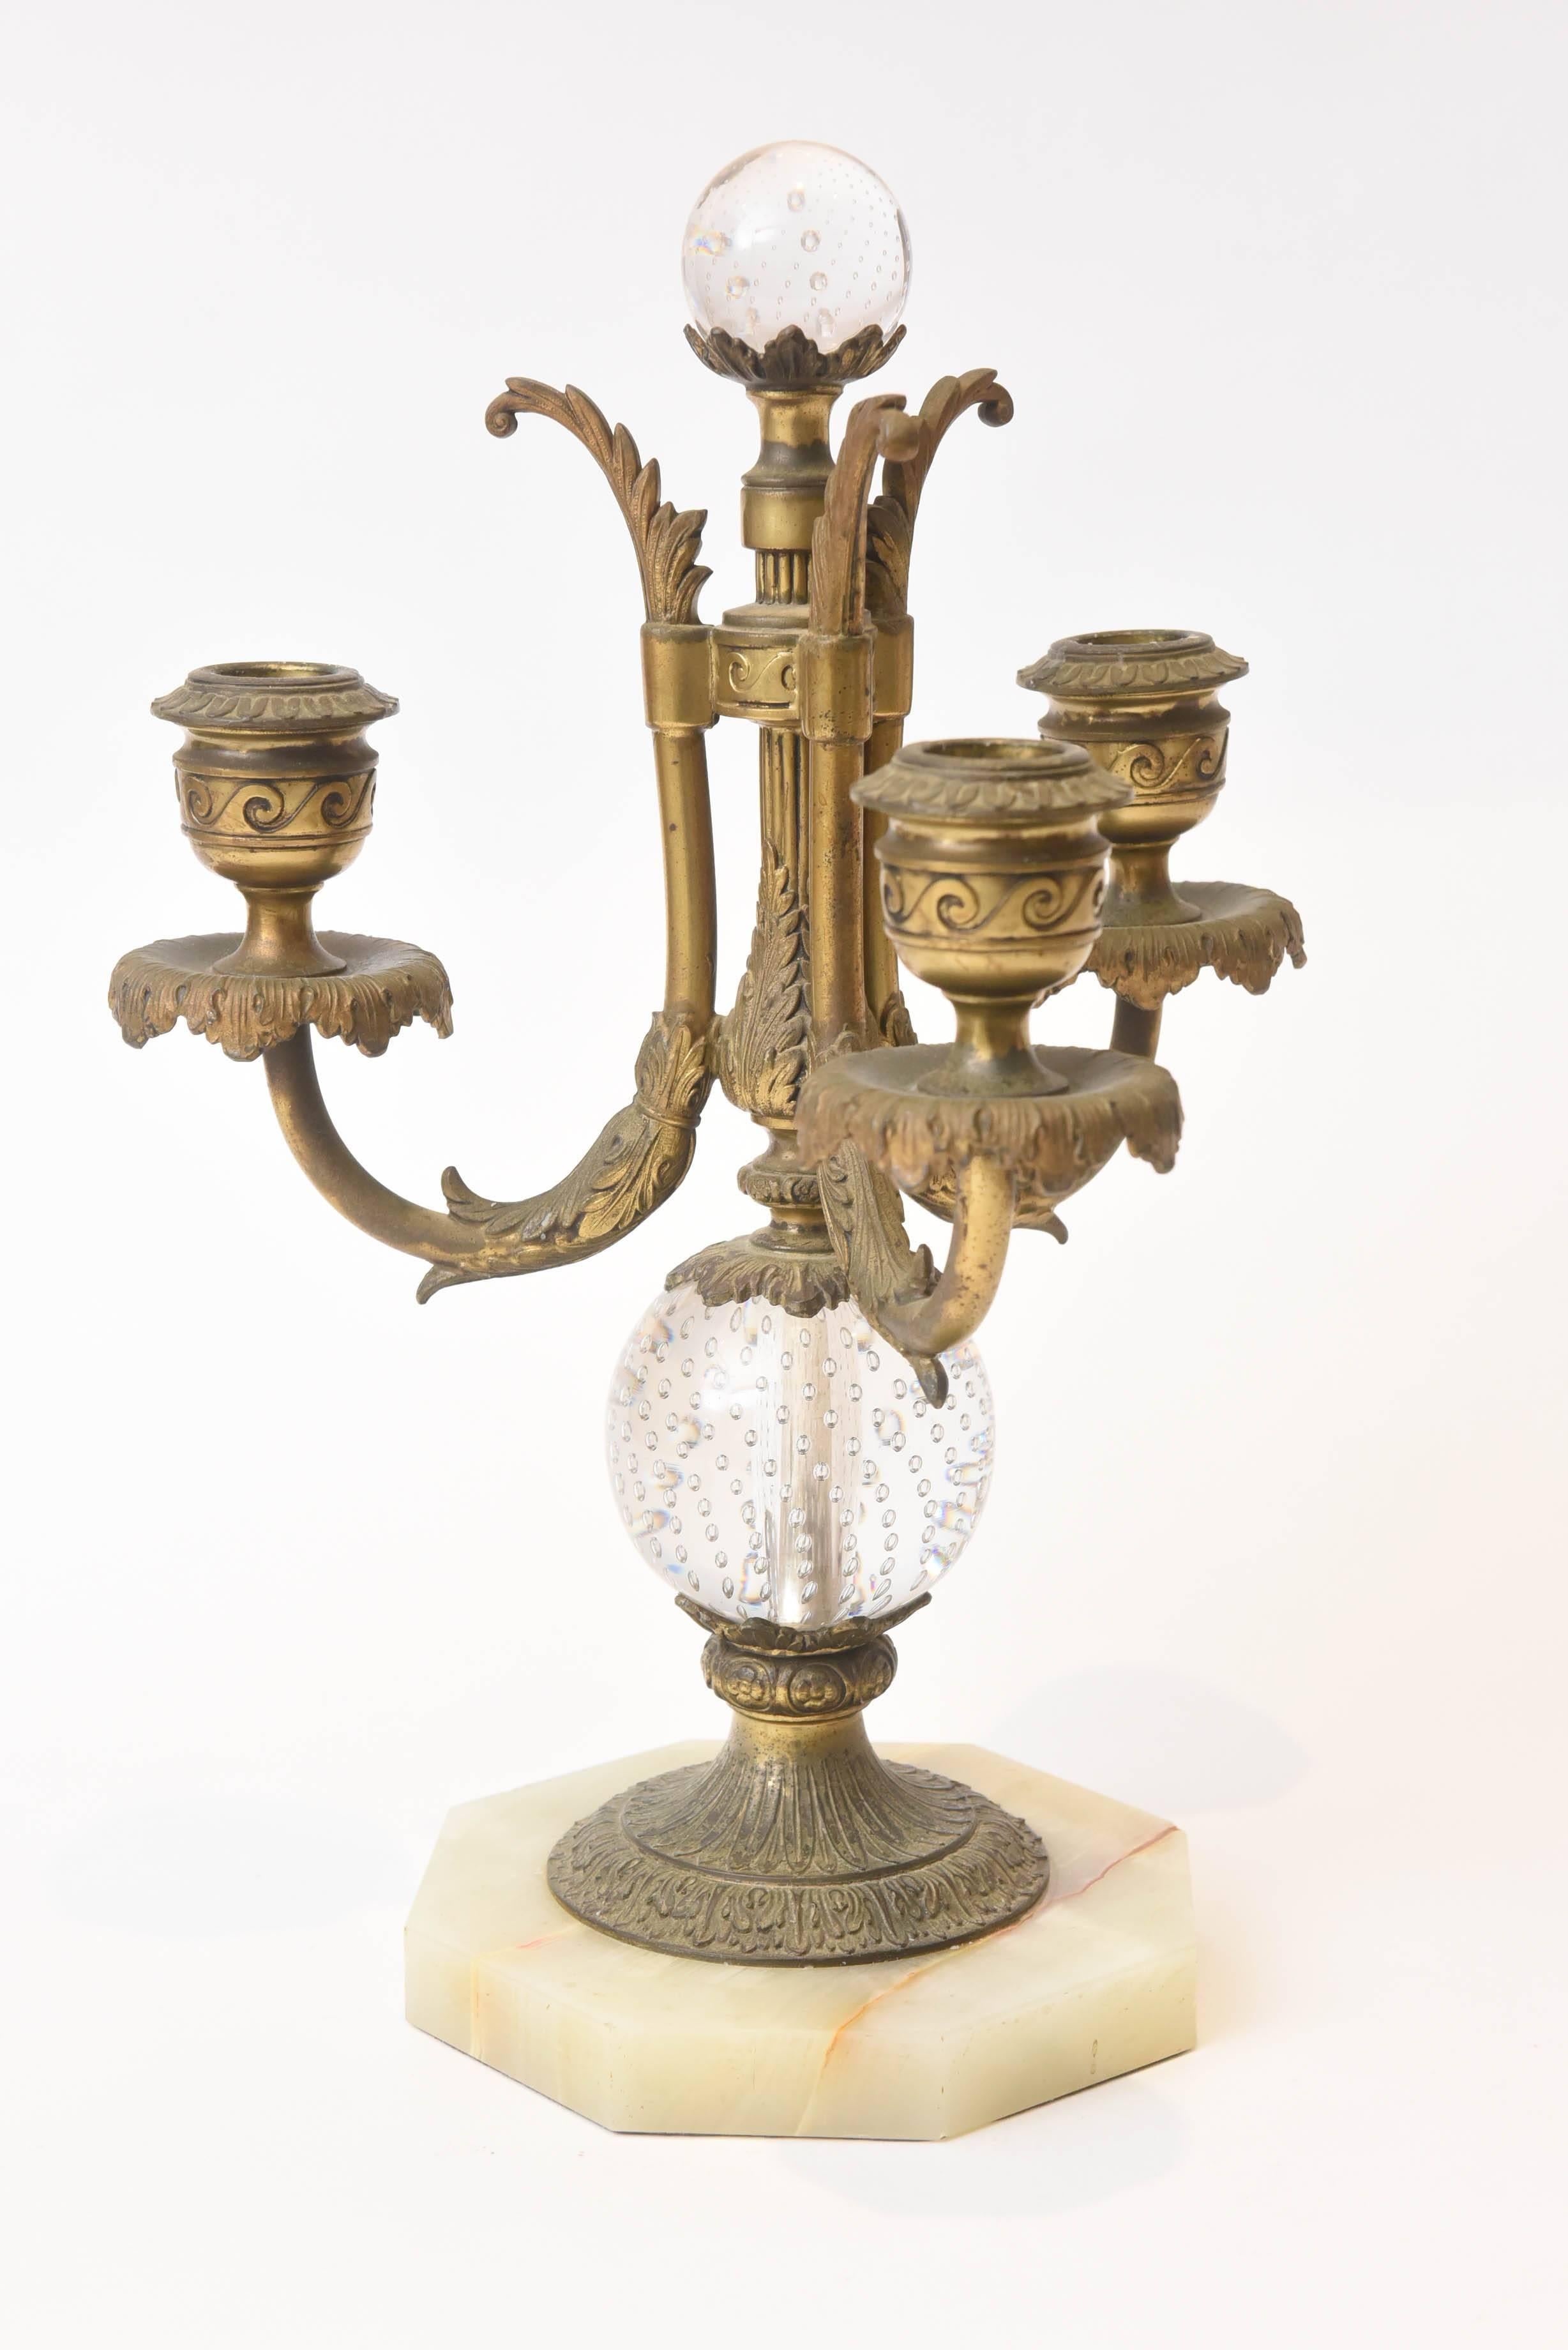 A wonderful and impressive three-piece set from Pairpoint during a period of their greatest success. A hand chased gilt metal candelabra main center piece with three arms, two controlled glass bubble accents and faux marble base. The matching pair